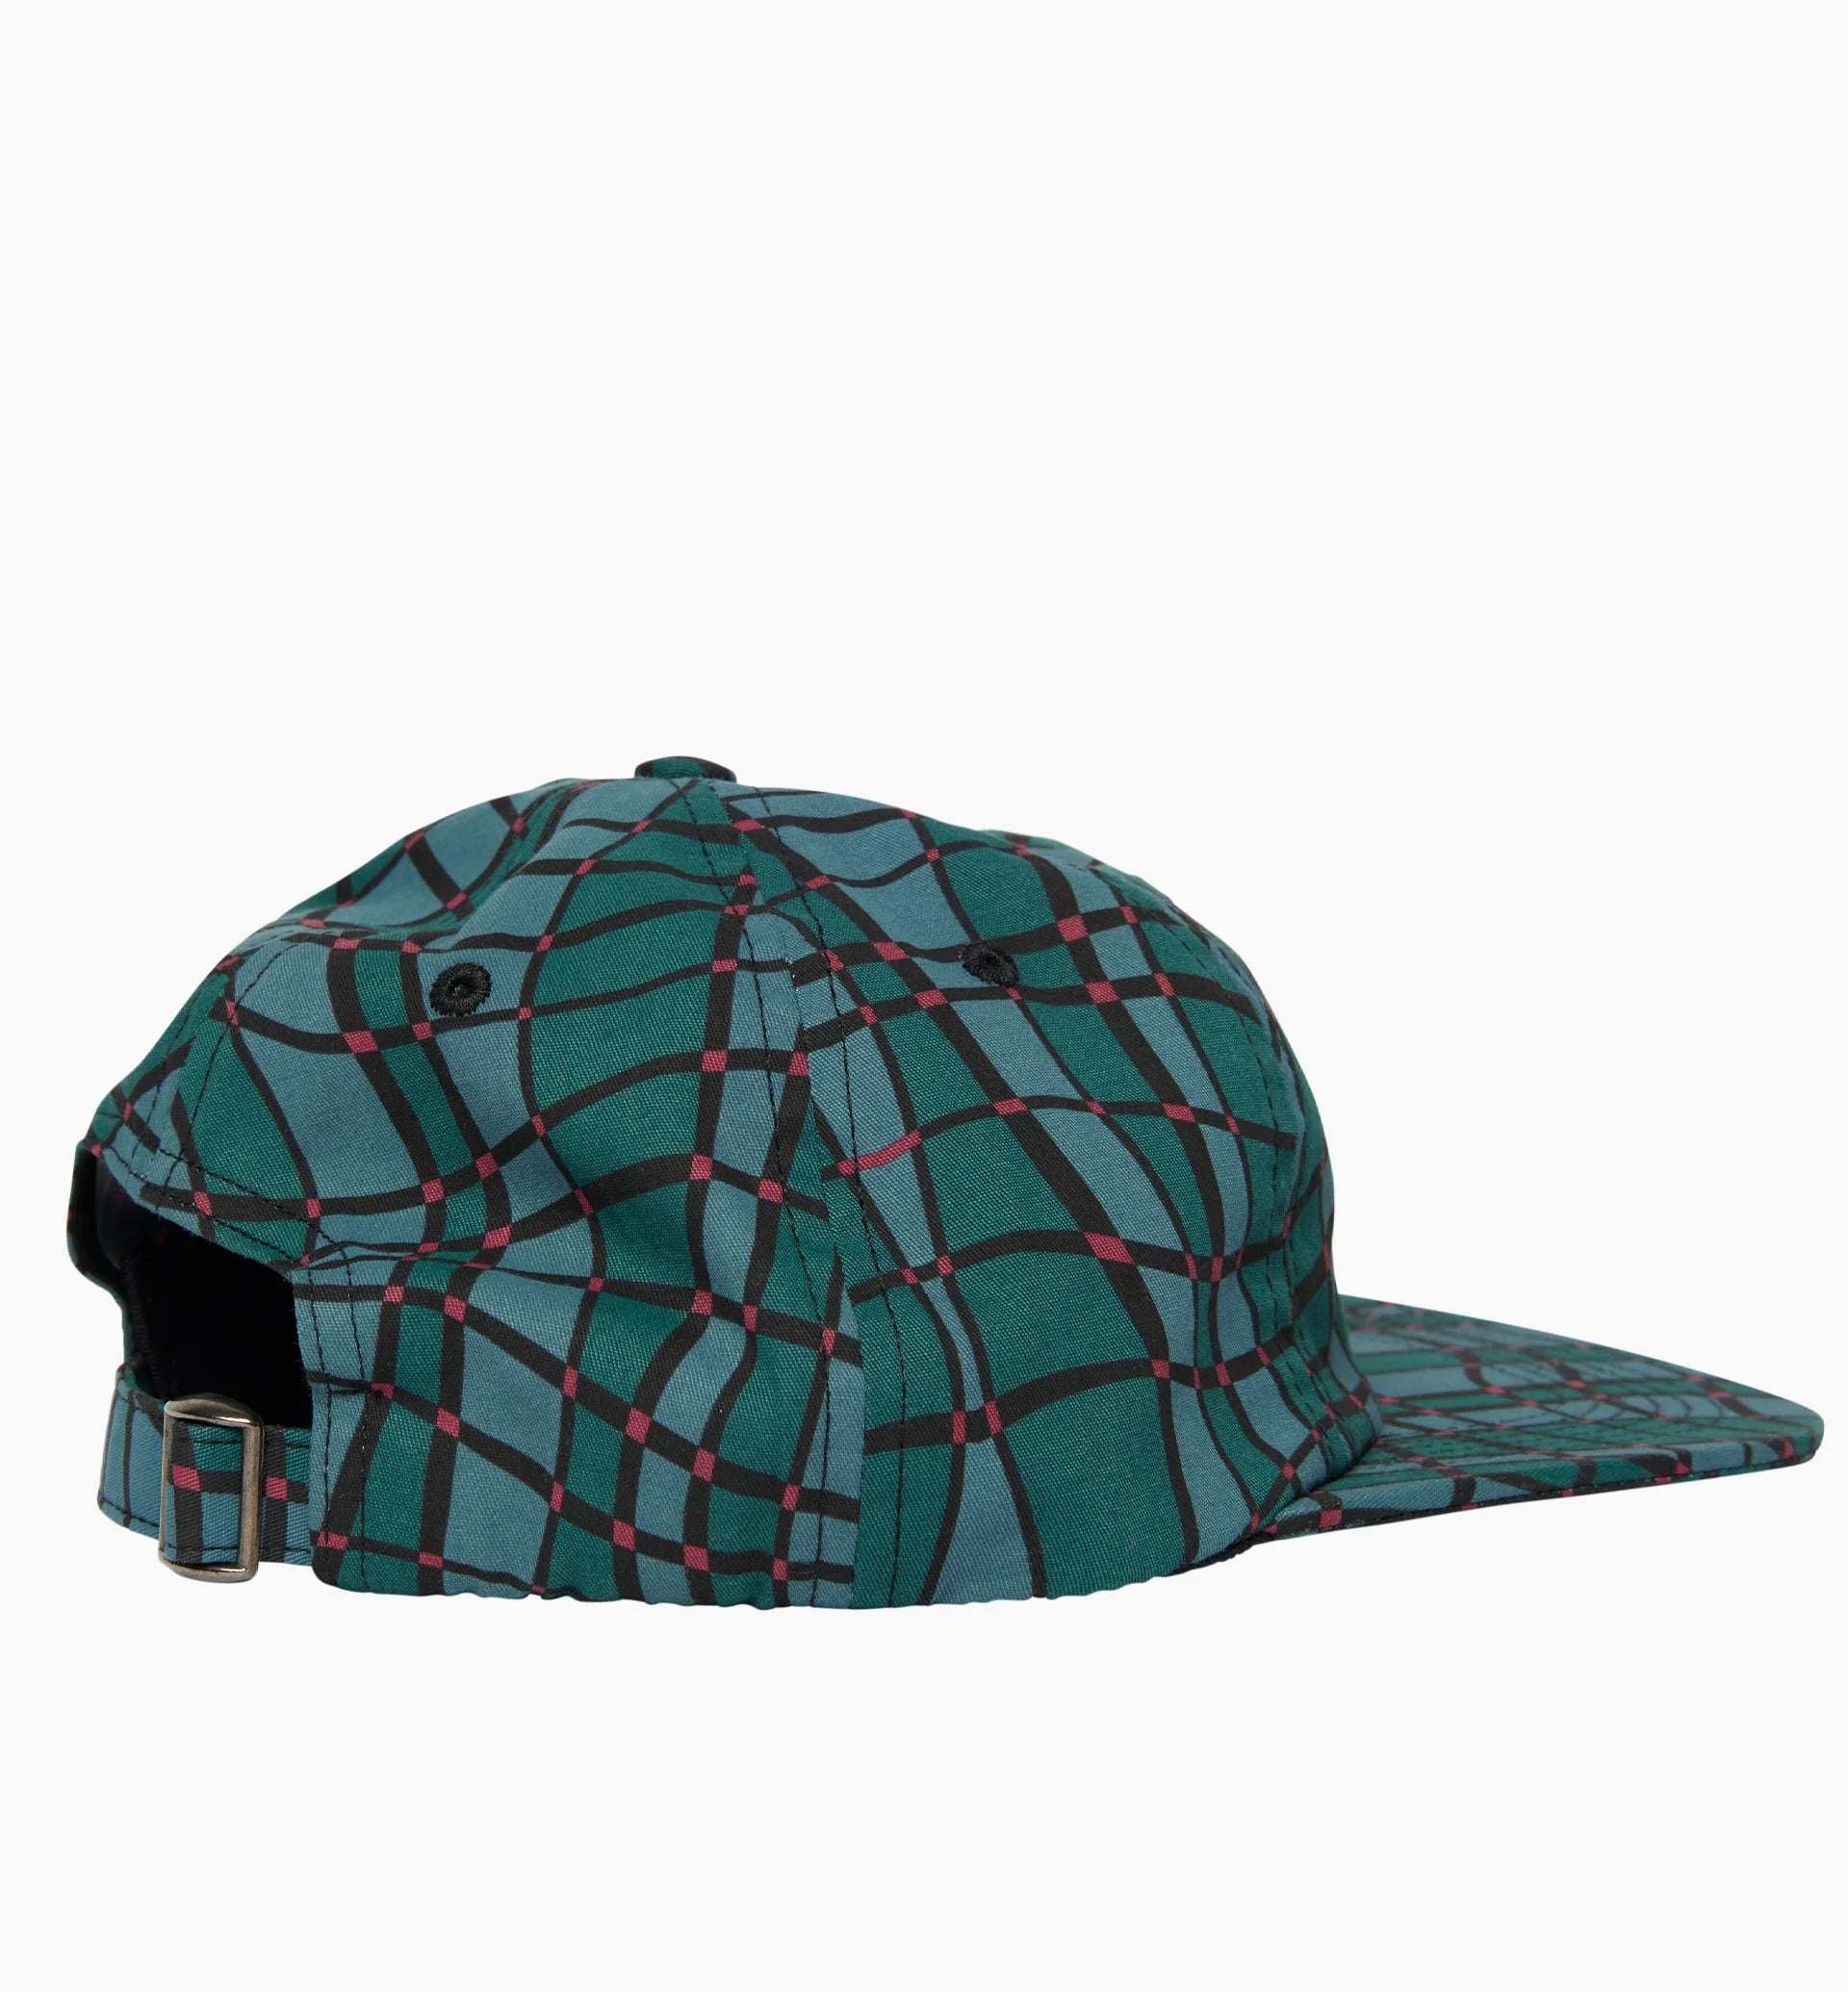 BY PARRA Squared Waves Pattern 6 Panel Hat LEO BOUTIQUE